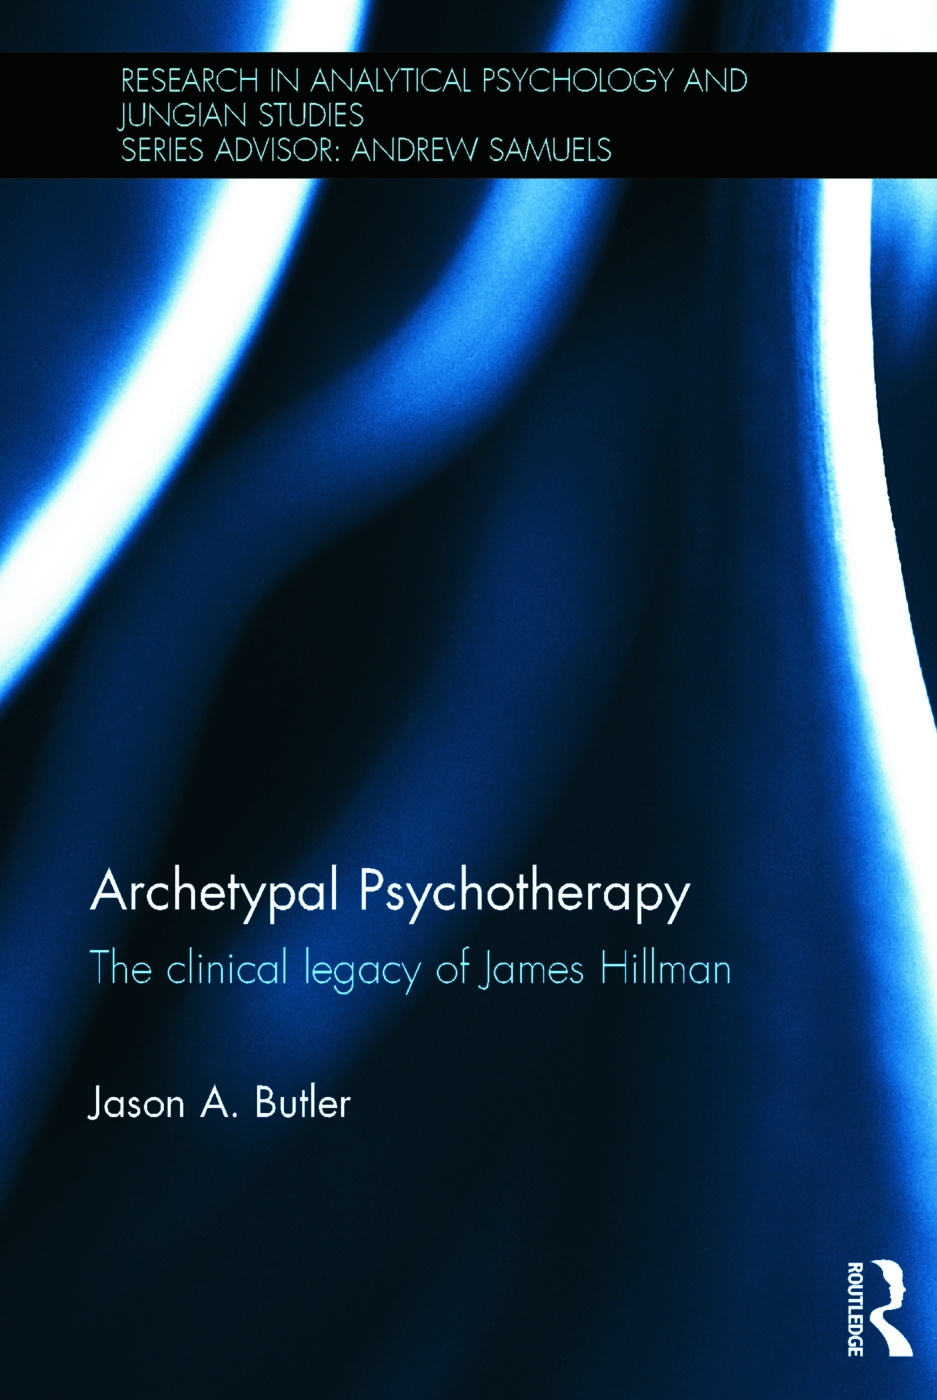 Archetypal Psychotherapy: The Clinical Legacy of James Hillman